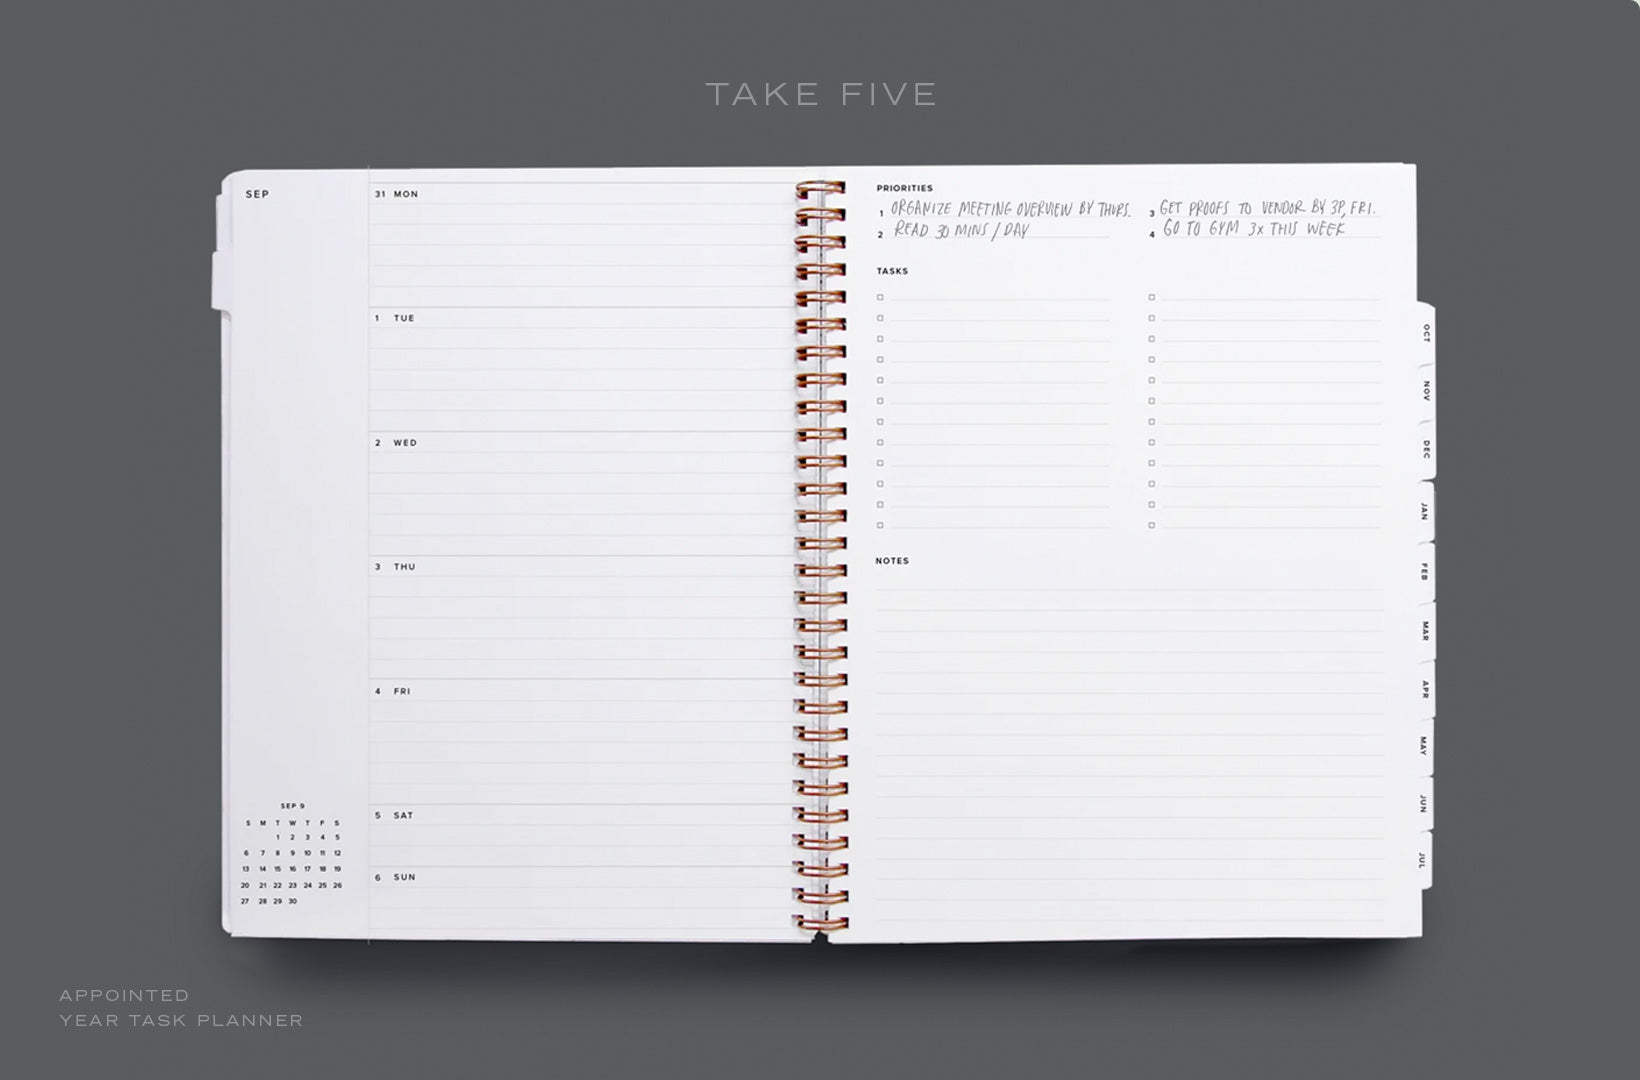 A Year Task Planner lies open to the weekly view, with weekly priorities filled in.